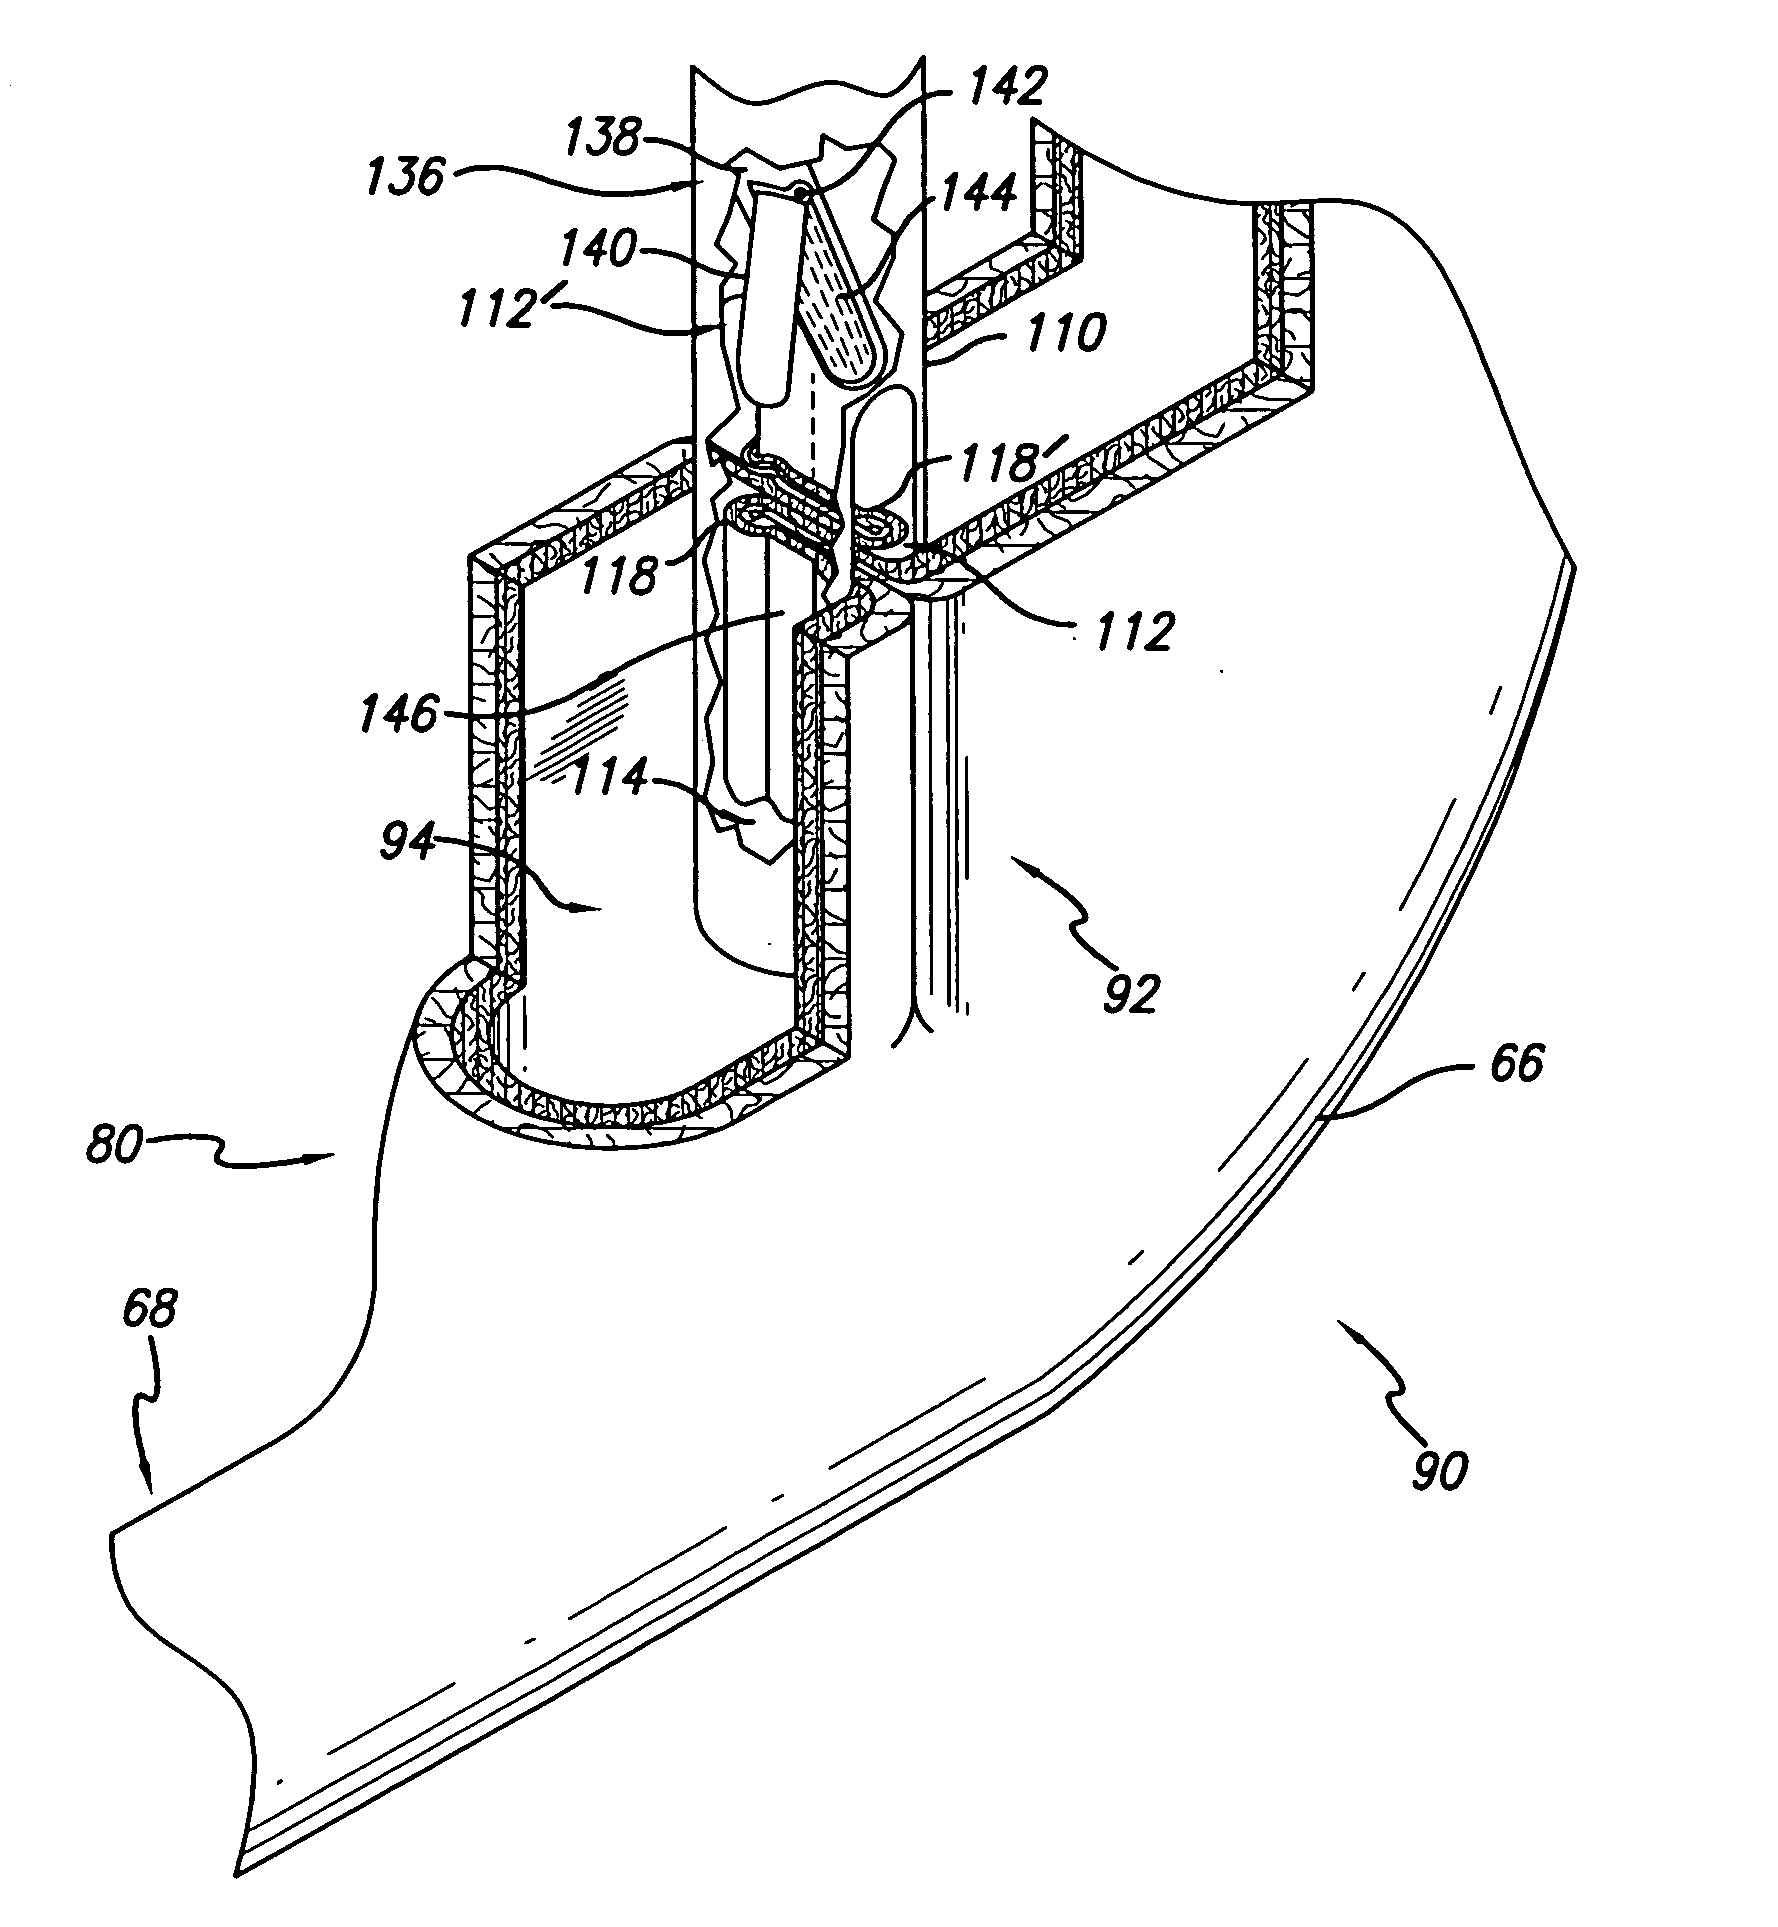 Overtube apparatus for insertion into a body